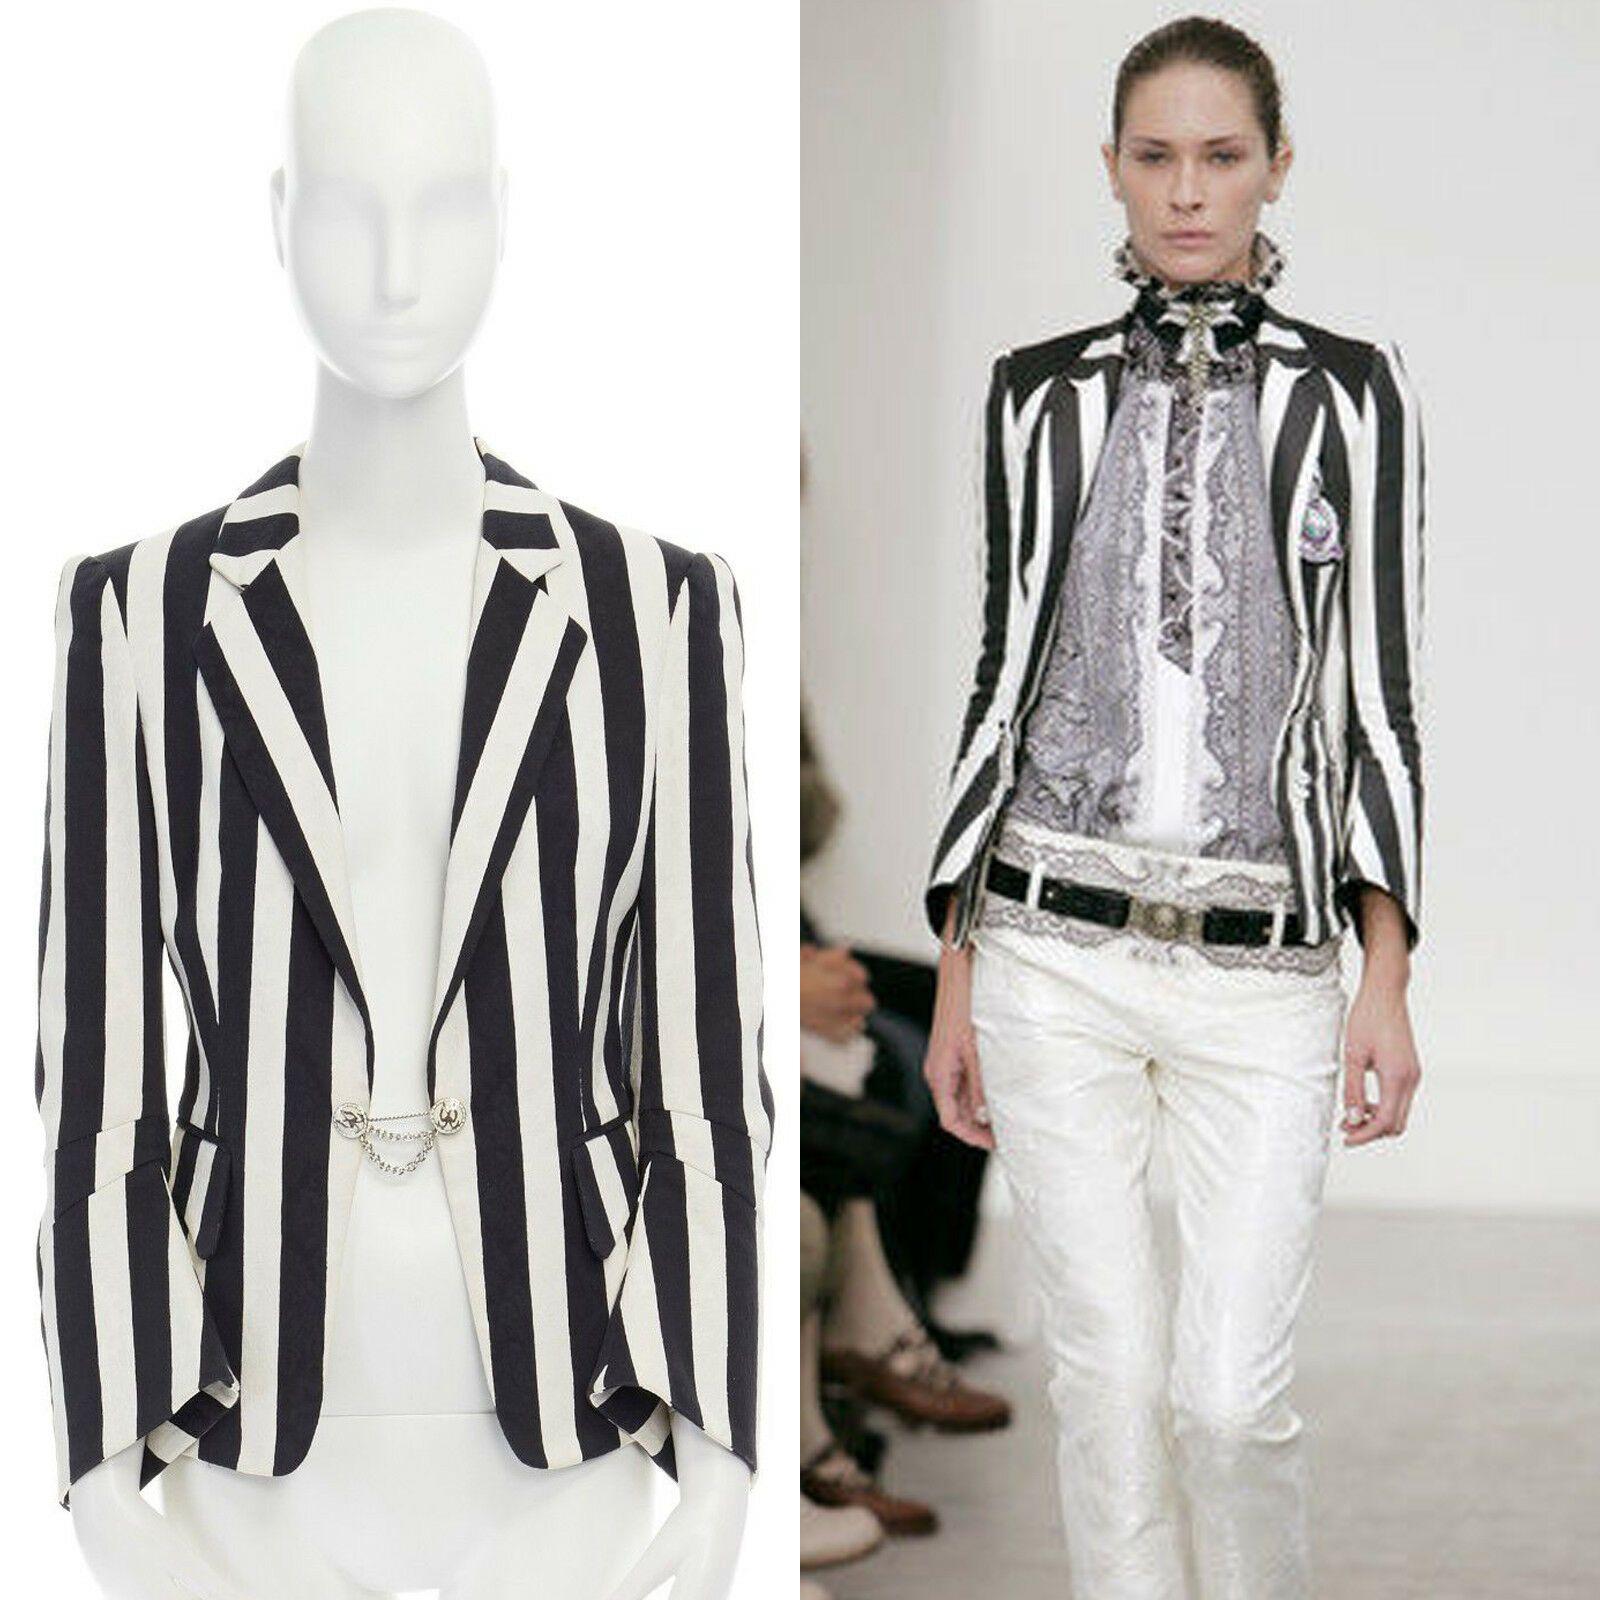 runway BALENCIAGA GHESQUIERE SS06 black white brocade blazer jacket FR38 S

BALENCIAGA by NICHOLAS GHESQUIERE
FROM SPRING SUMMER 2006 COLLECTION
Beetlejuice inspired . Rayon, viscose, cotton, spandex . Black white vertical striped . 
Textured